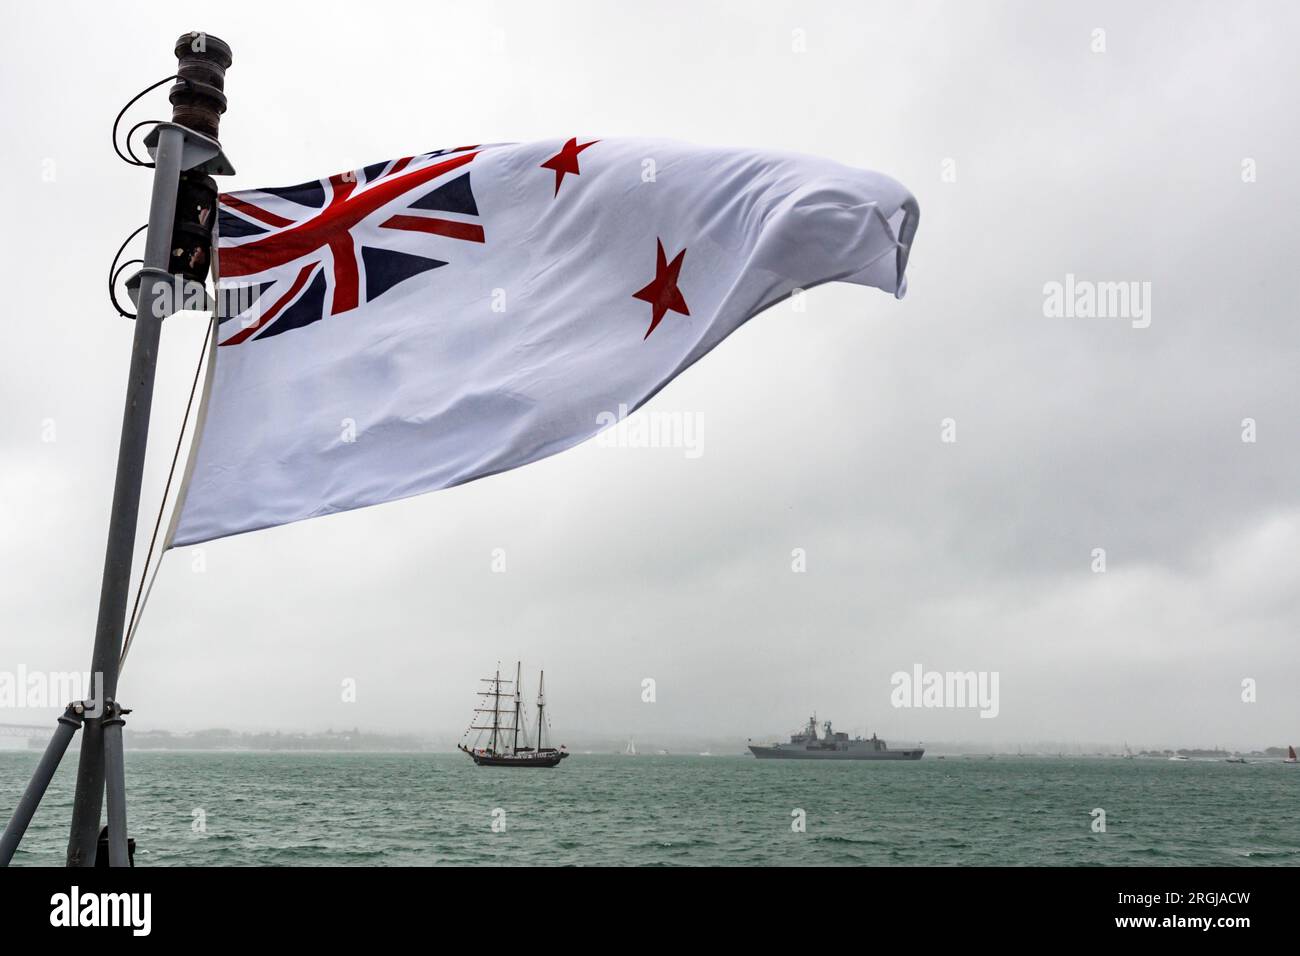 Navy ships taking part in an International Naval Review in the Waitemata Harbour, Auckland, New Zealand, Saturday, November 19, 2016. Stock Photo